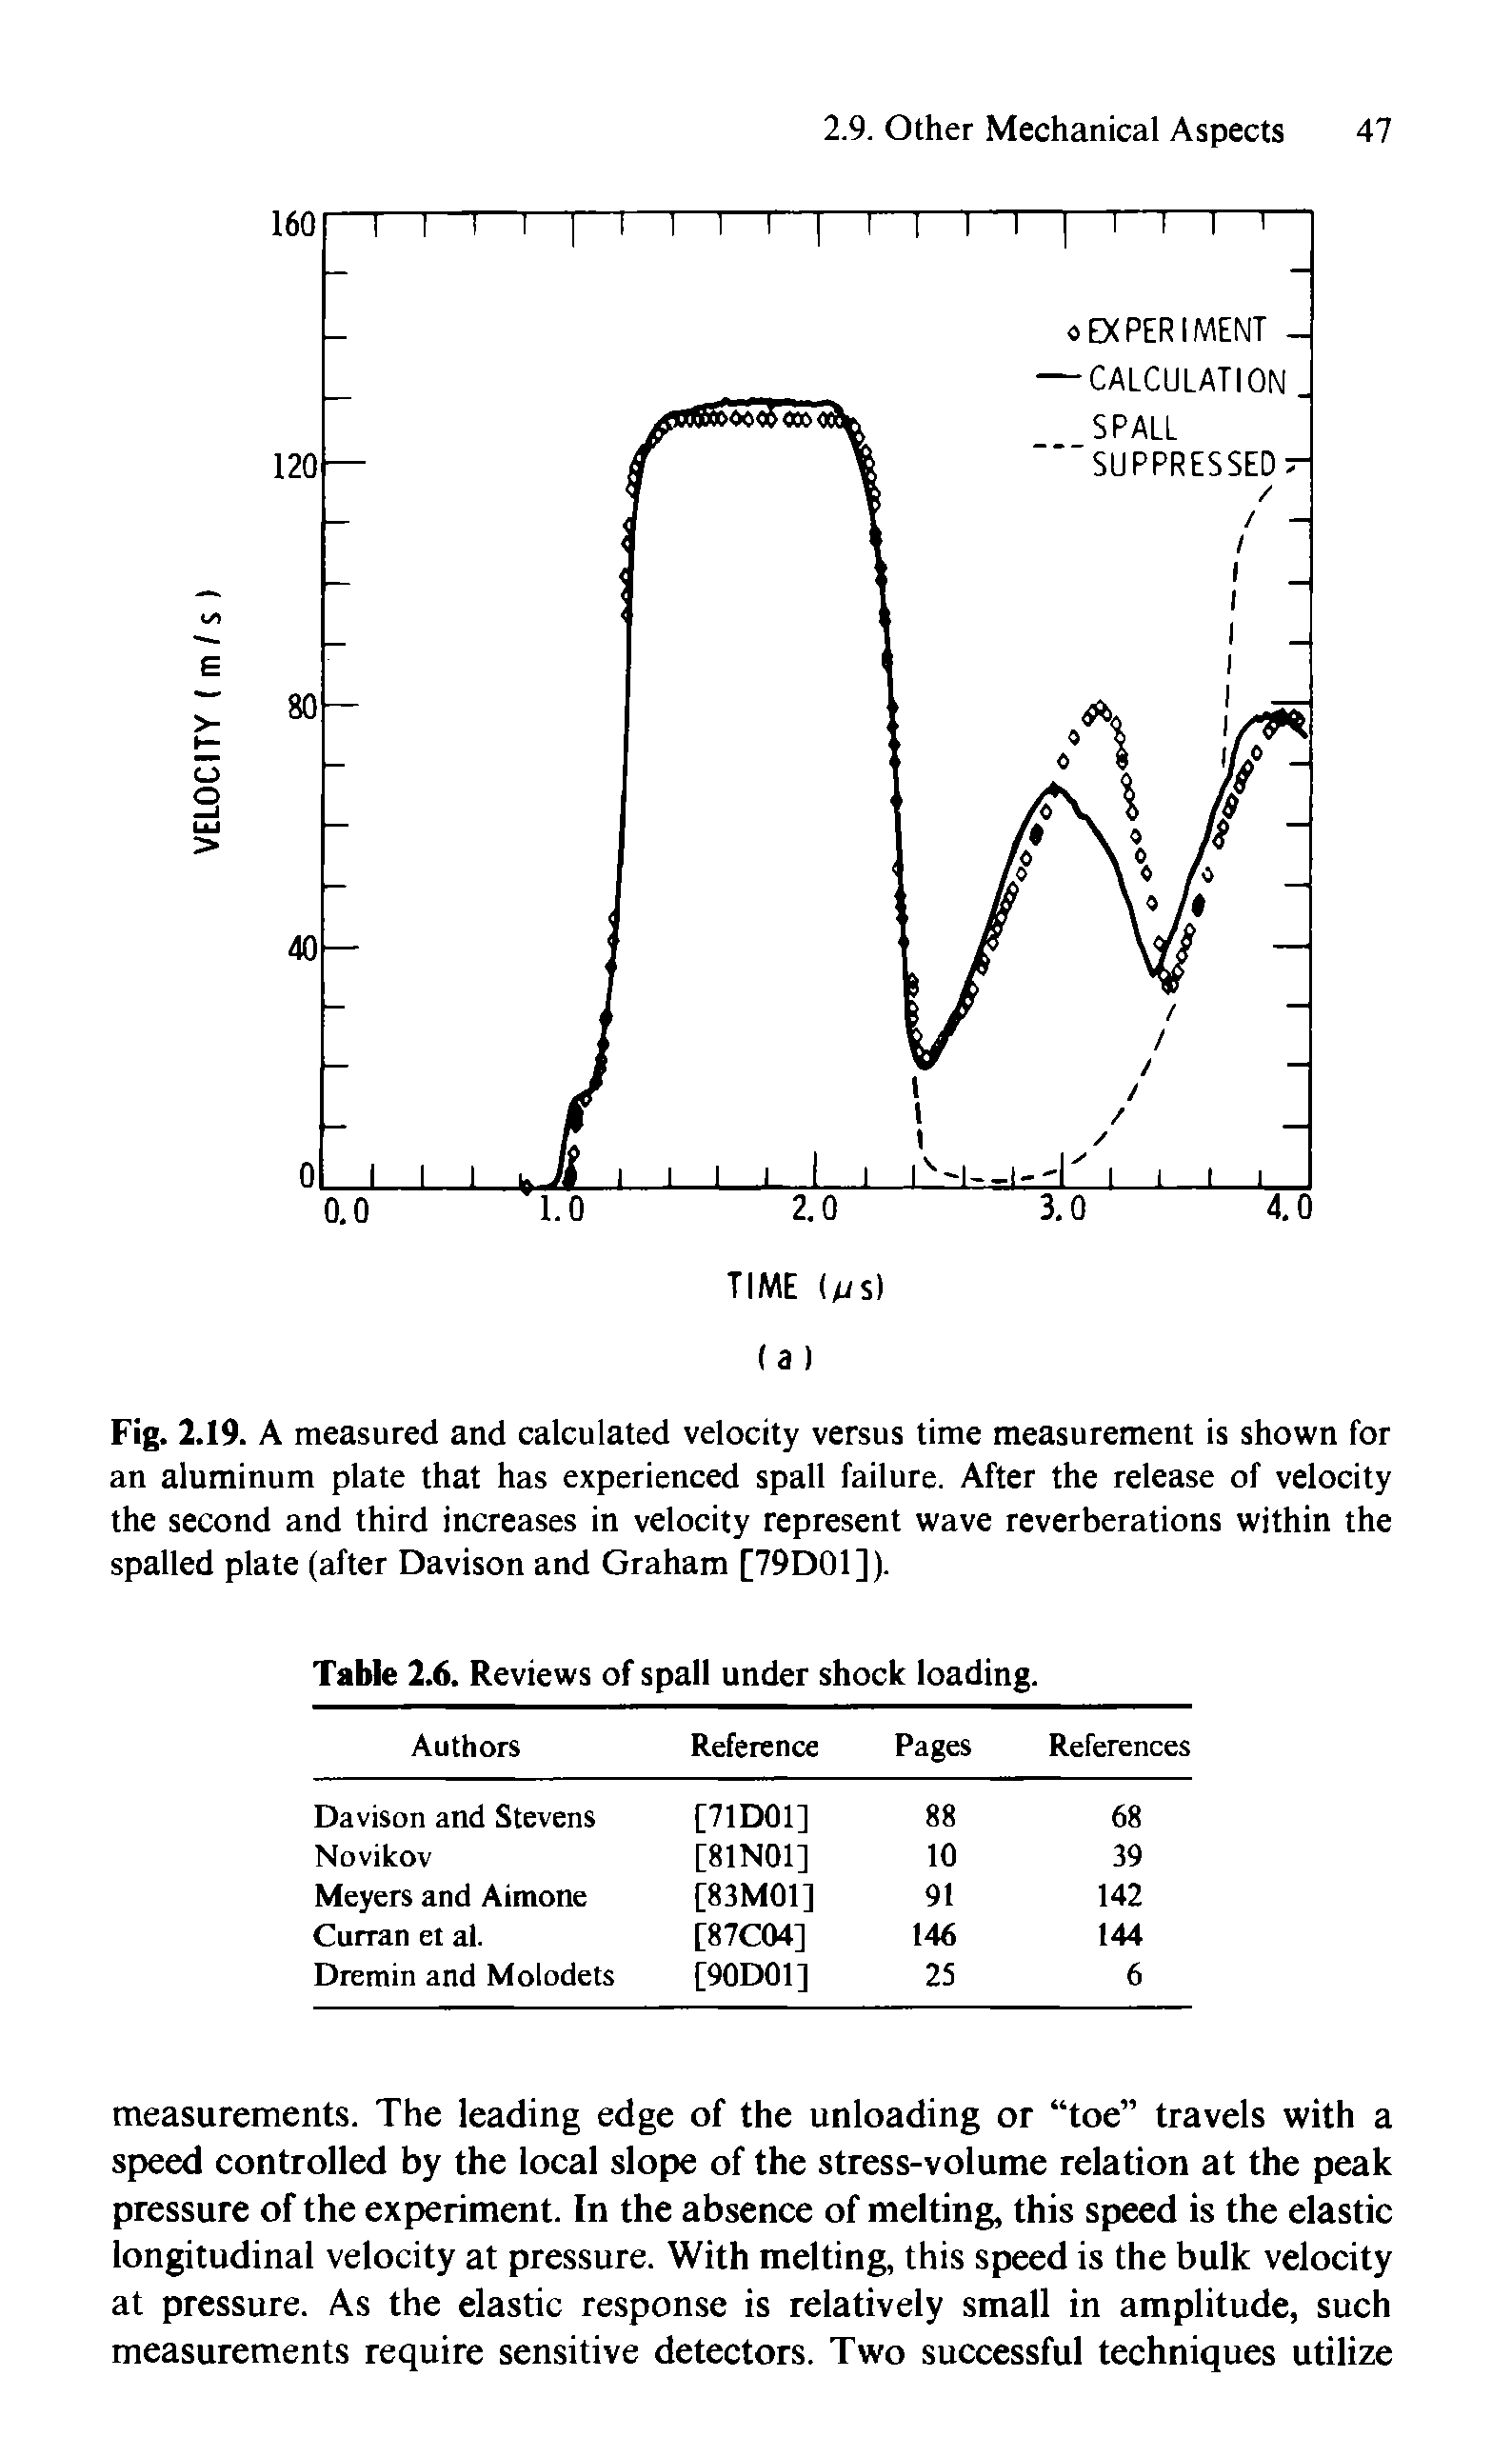 Fig. 2.19. A measured and calculated velocity versus time measurement is shown for an aluminum plate that has experienced spall failure. After the release of velocity the second and third increases in velocity represent wave reverberations within the spalled plate (after Davison and Graham [79D01]).